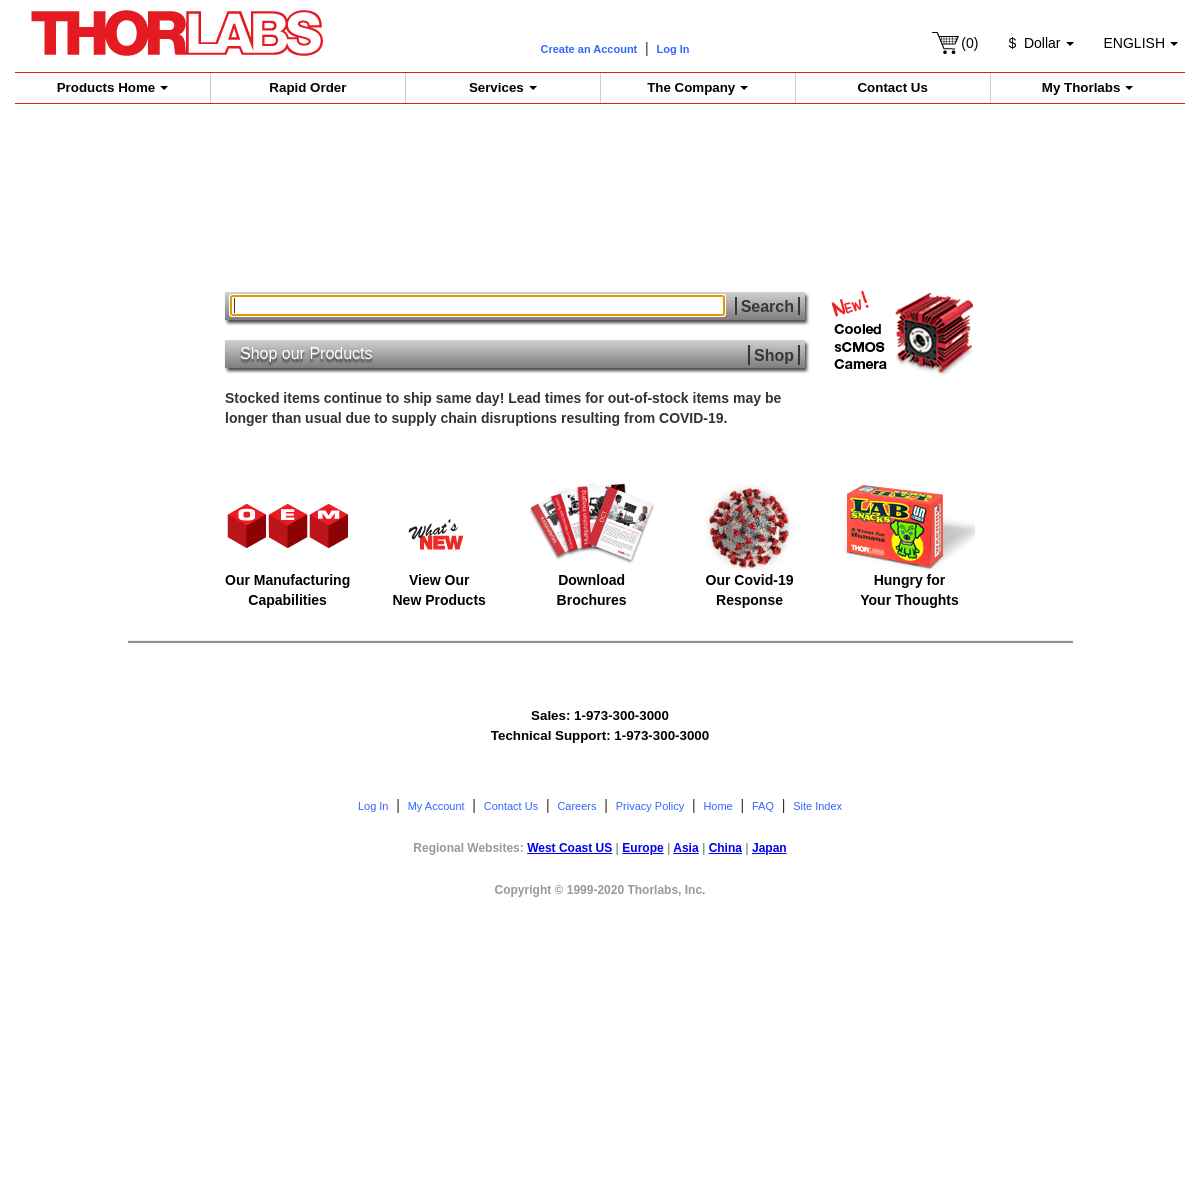 A complete backup of thorlabs.com